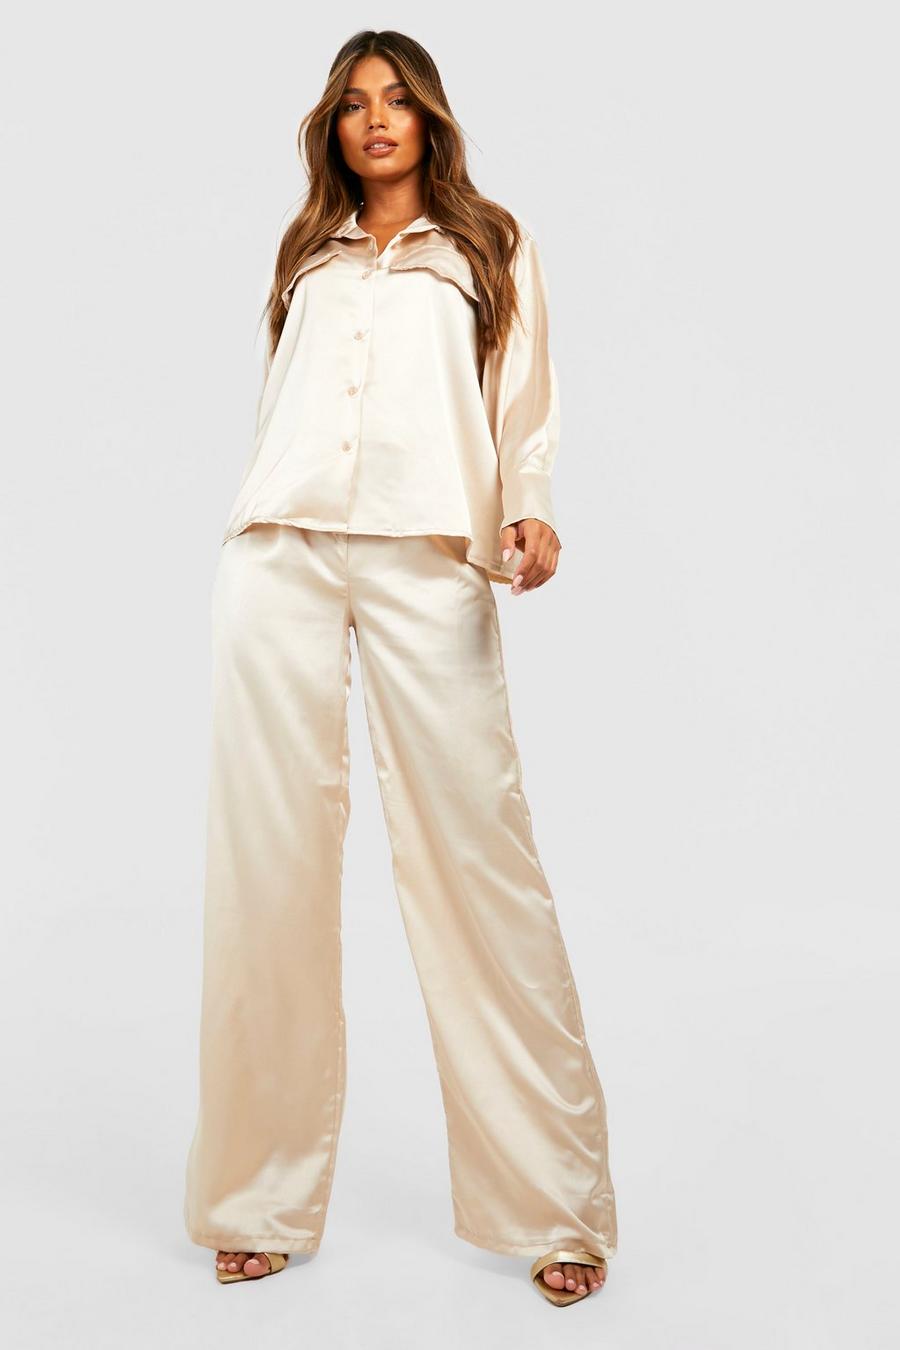 Champagne beige Satin Relaxed Fit Shirt & Wide Leg Trousers 